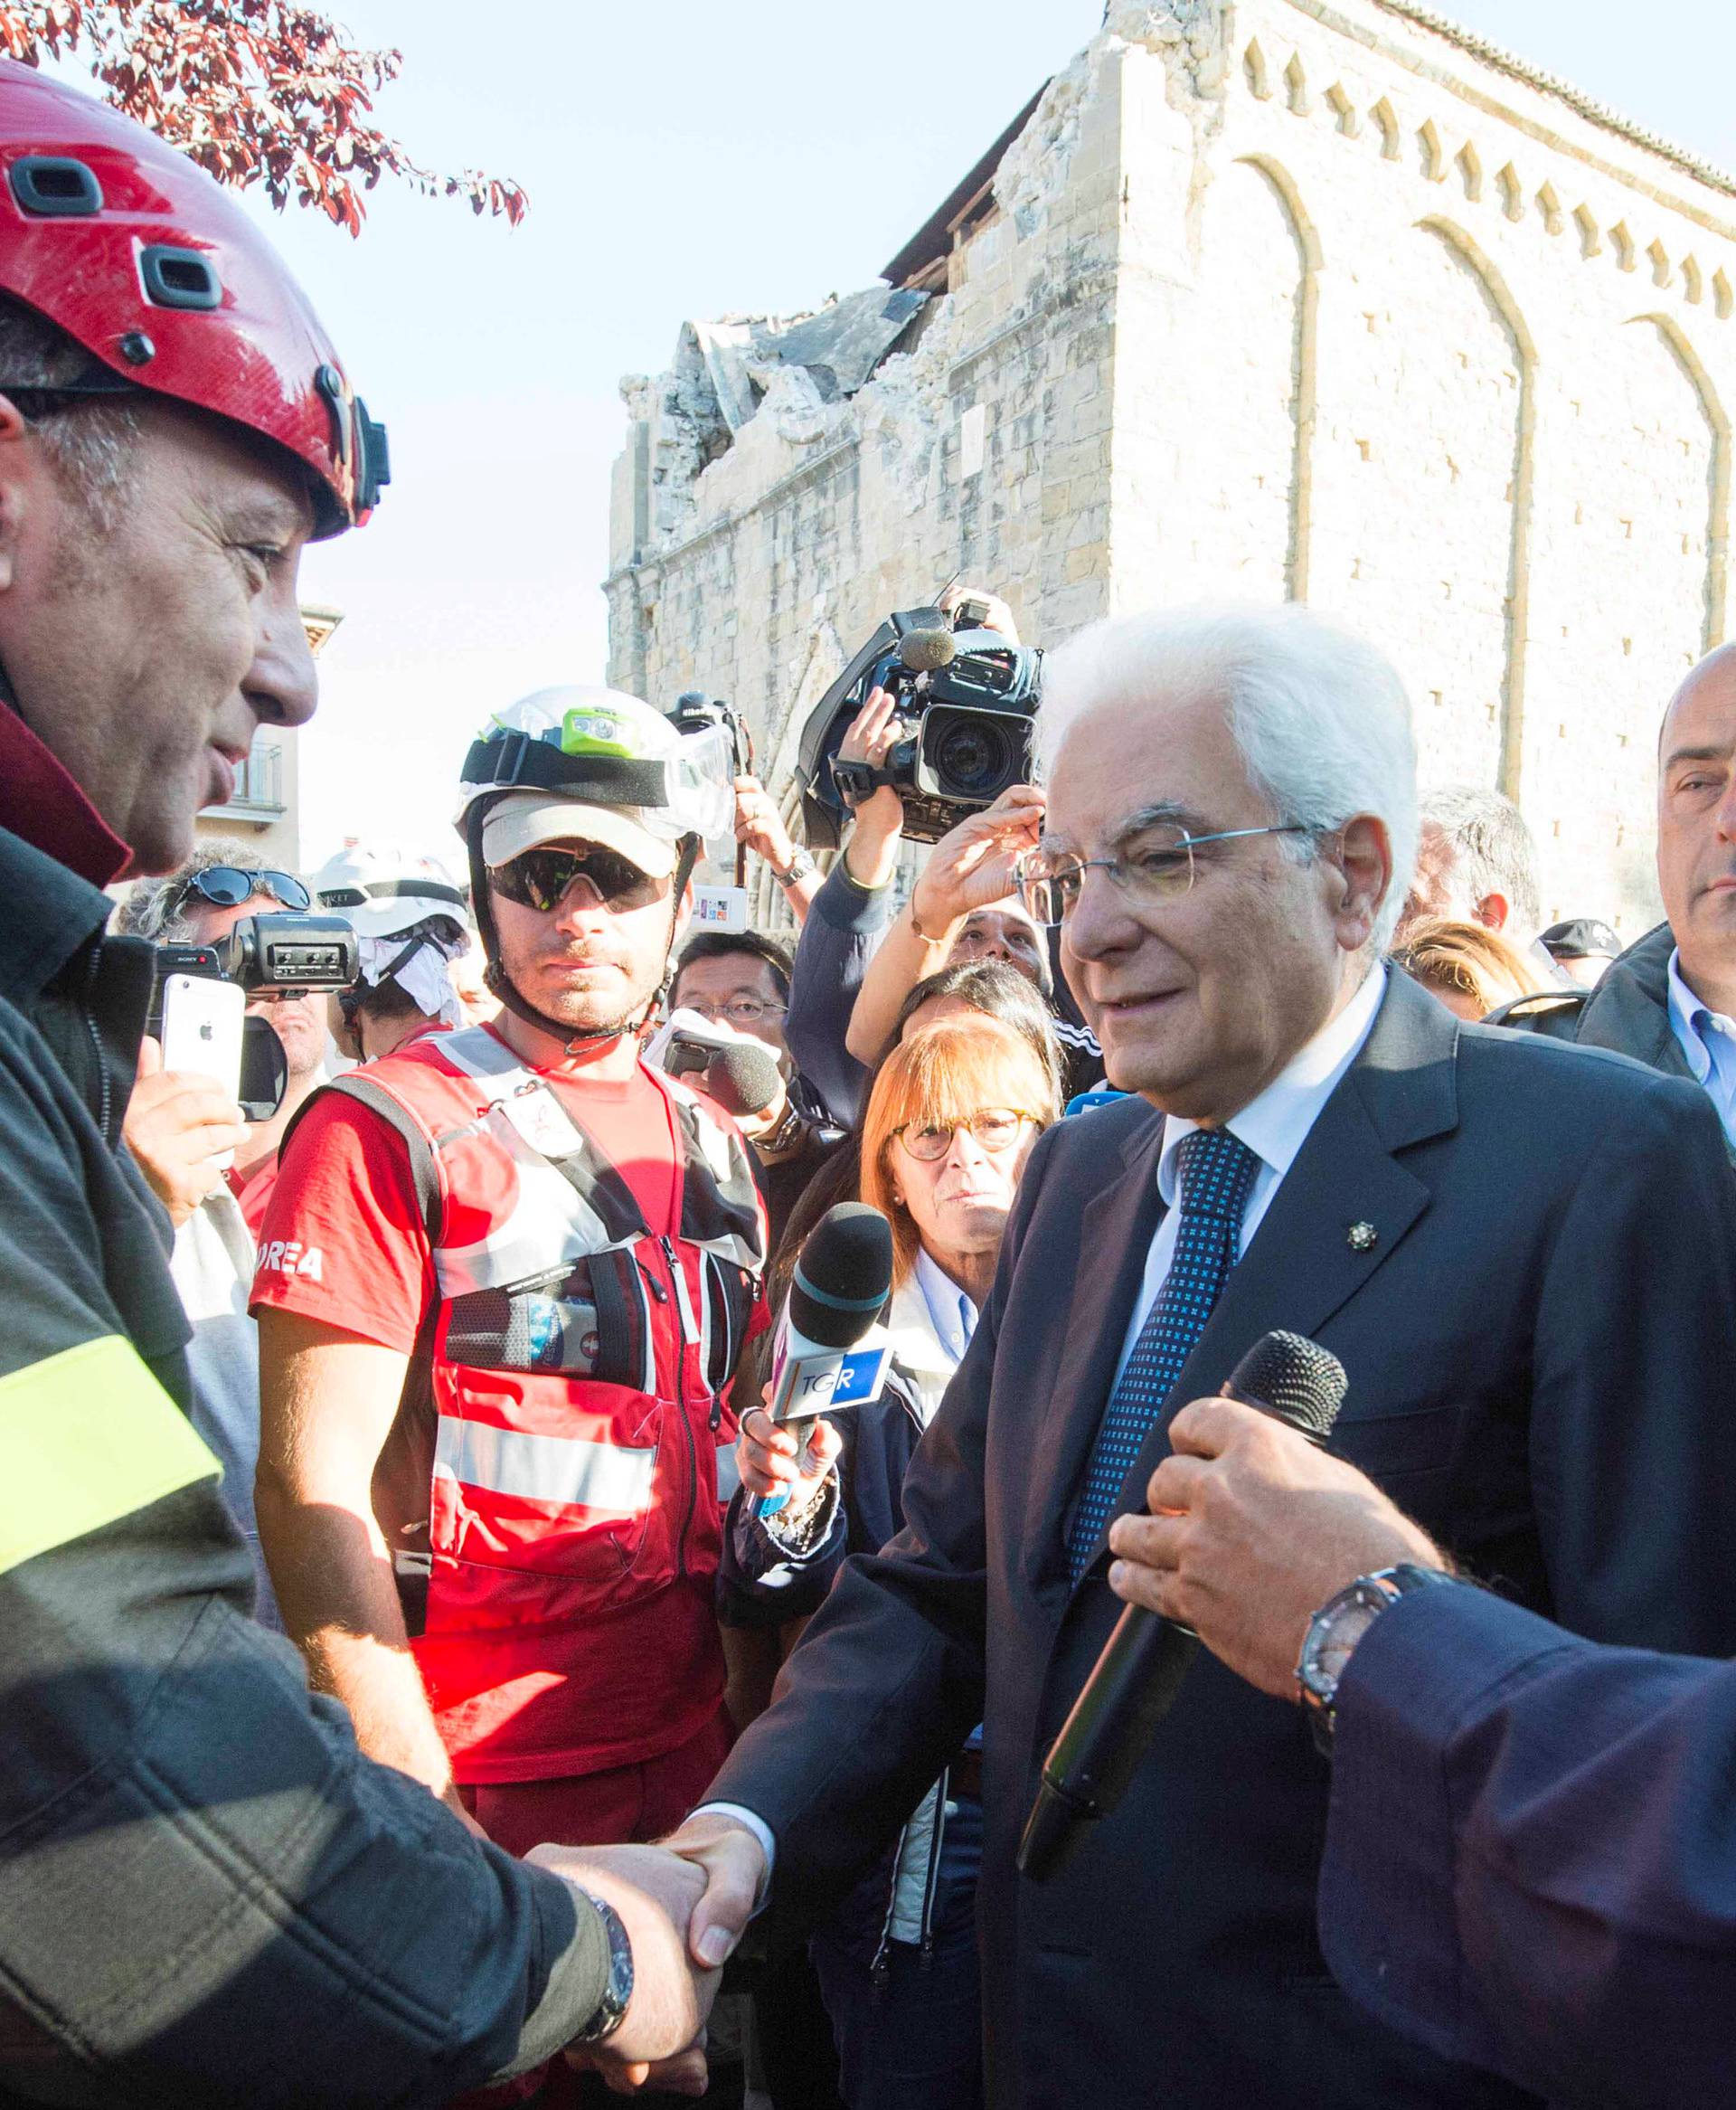 Italian President Sergio Mattarella shakes hands with a firefighter as he visits Amatrice after the earthquake in central Italy